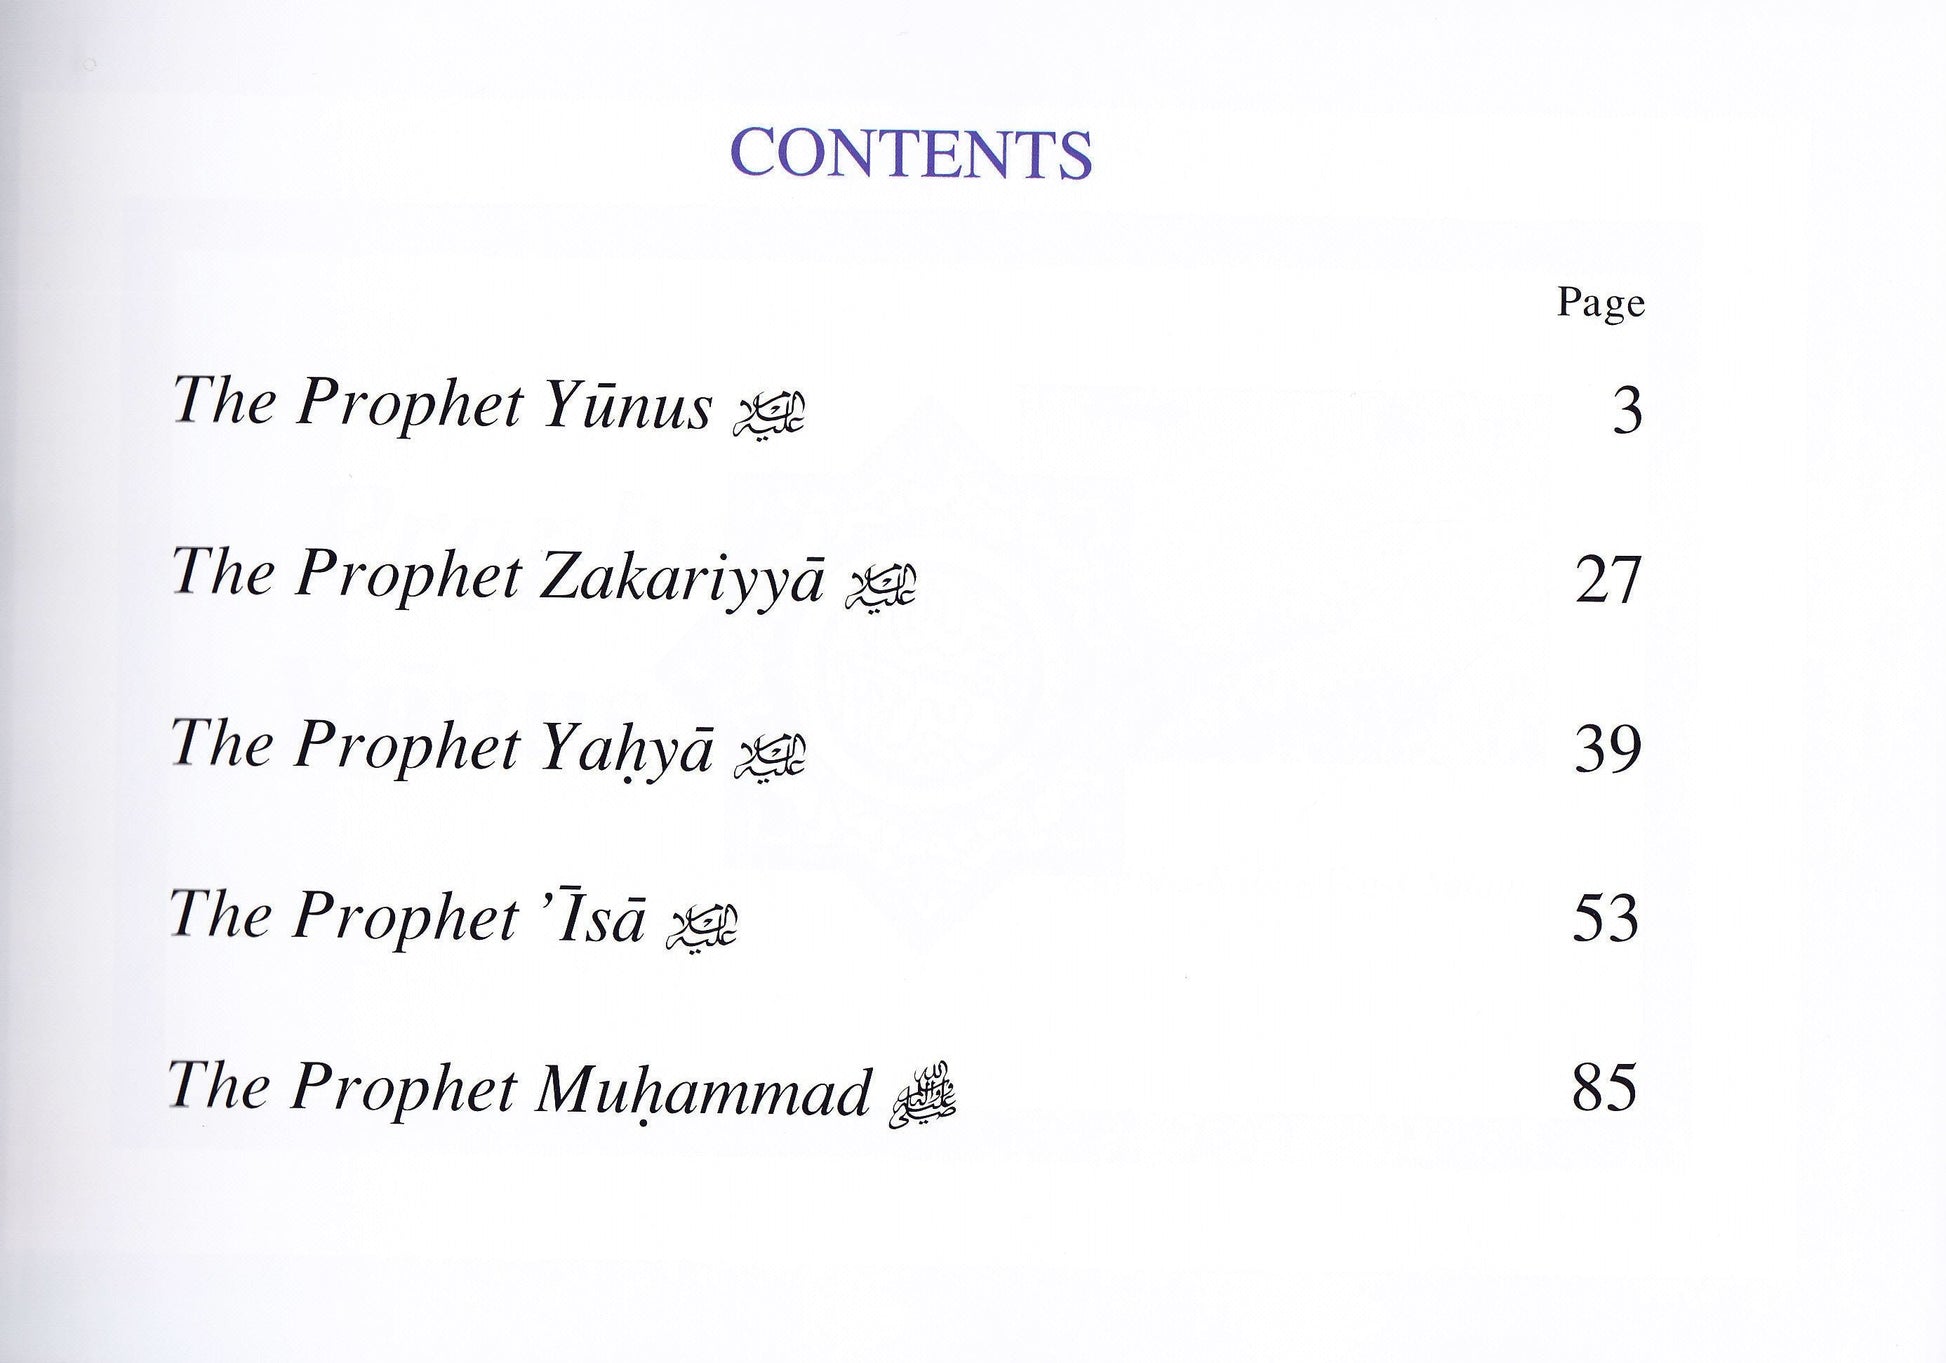 Prophets of Allah: Volume 5 - Premium Textbook from IQRA' international Educational Foundation - Just $8! Shop now at IQRA' international Educational Foundation